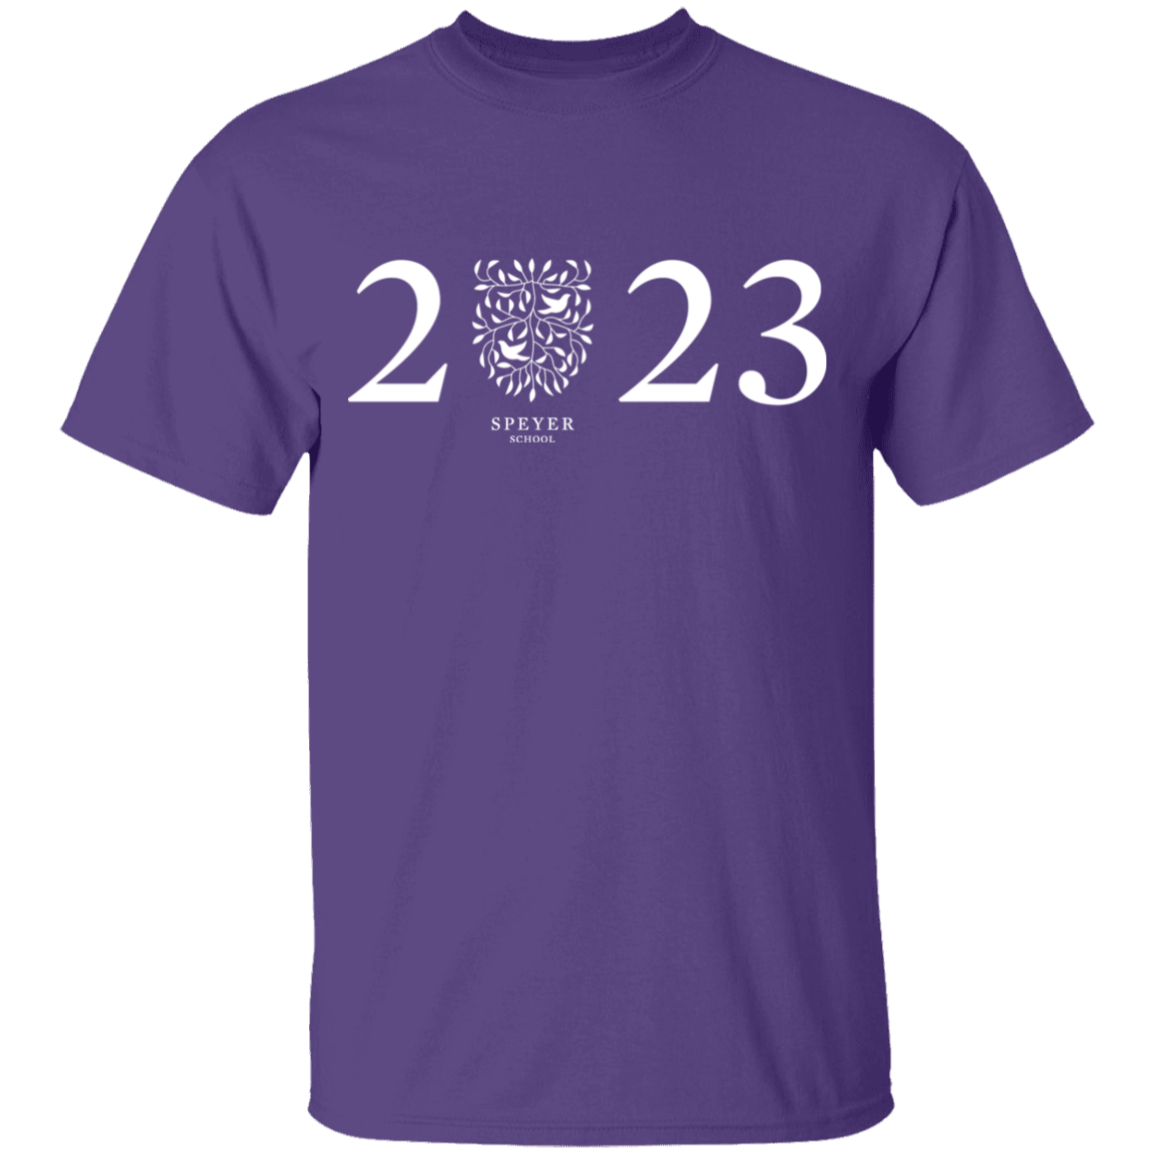 Class of 2023 T-Shirt, Youth Sizes